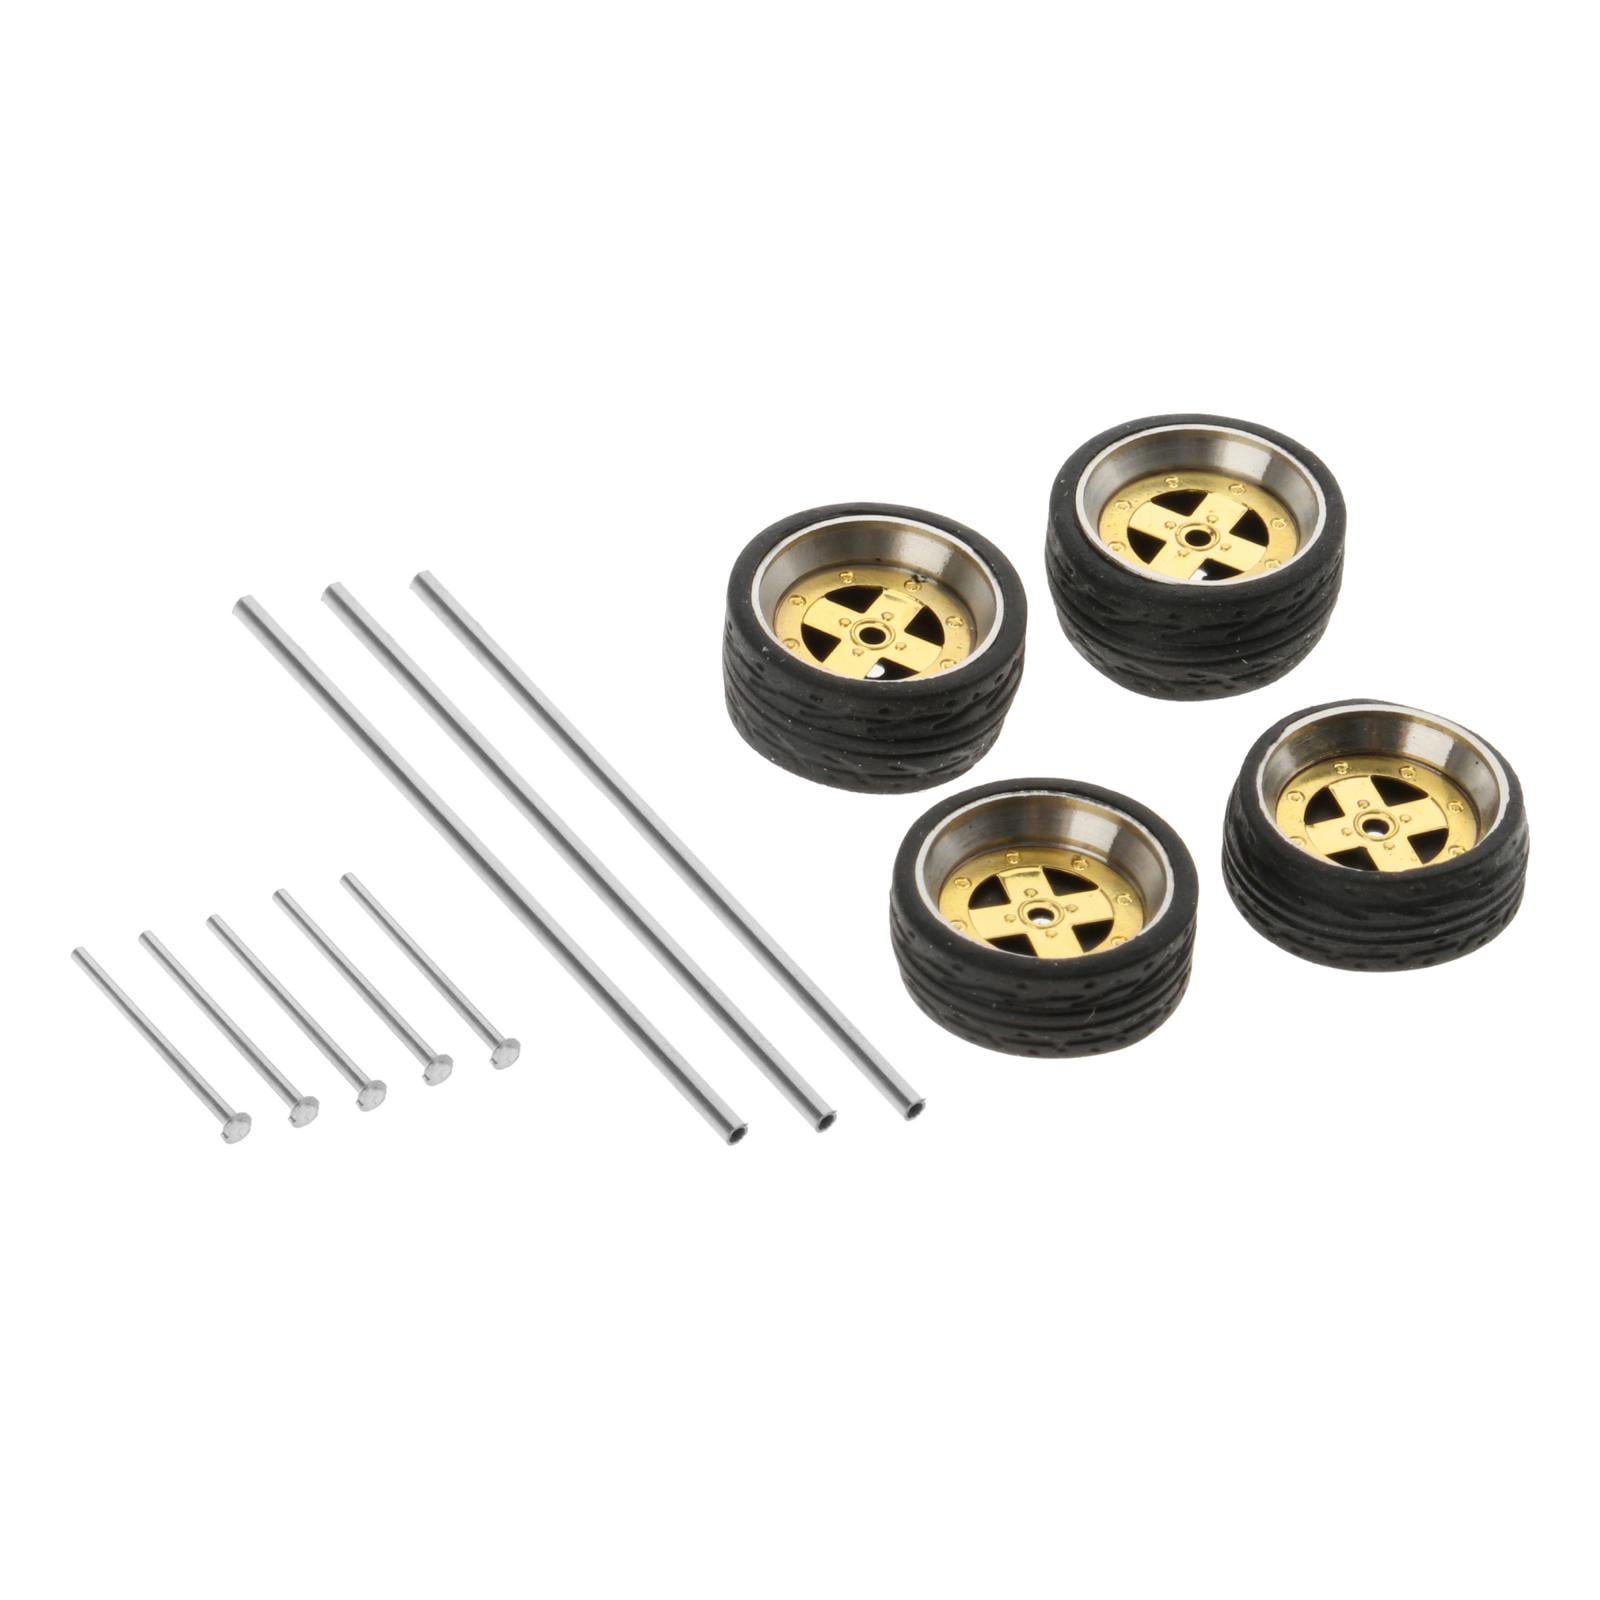 5 sets 5 star big/small Rose Gold long axle fit 1:64 Hot Wheels rubber tires 